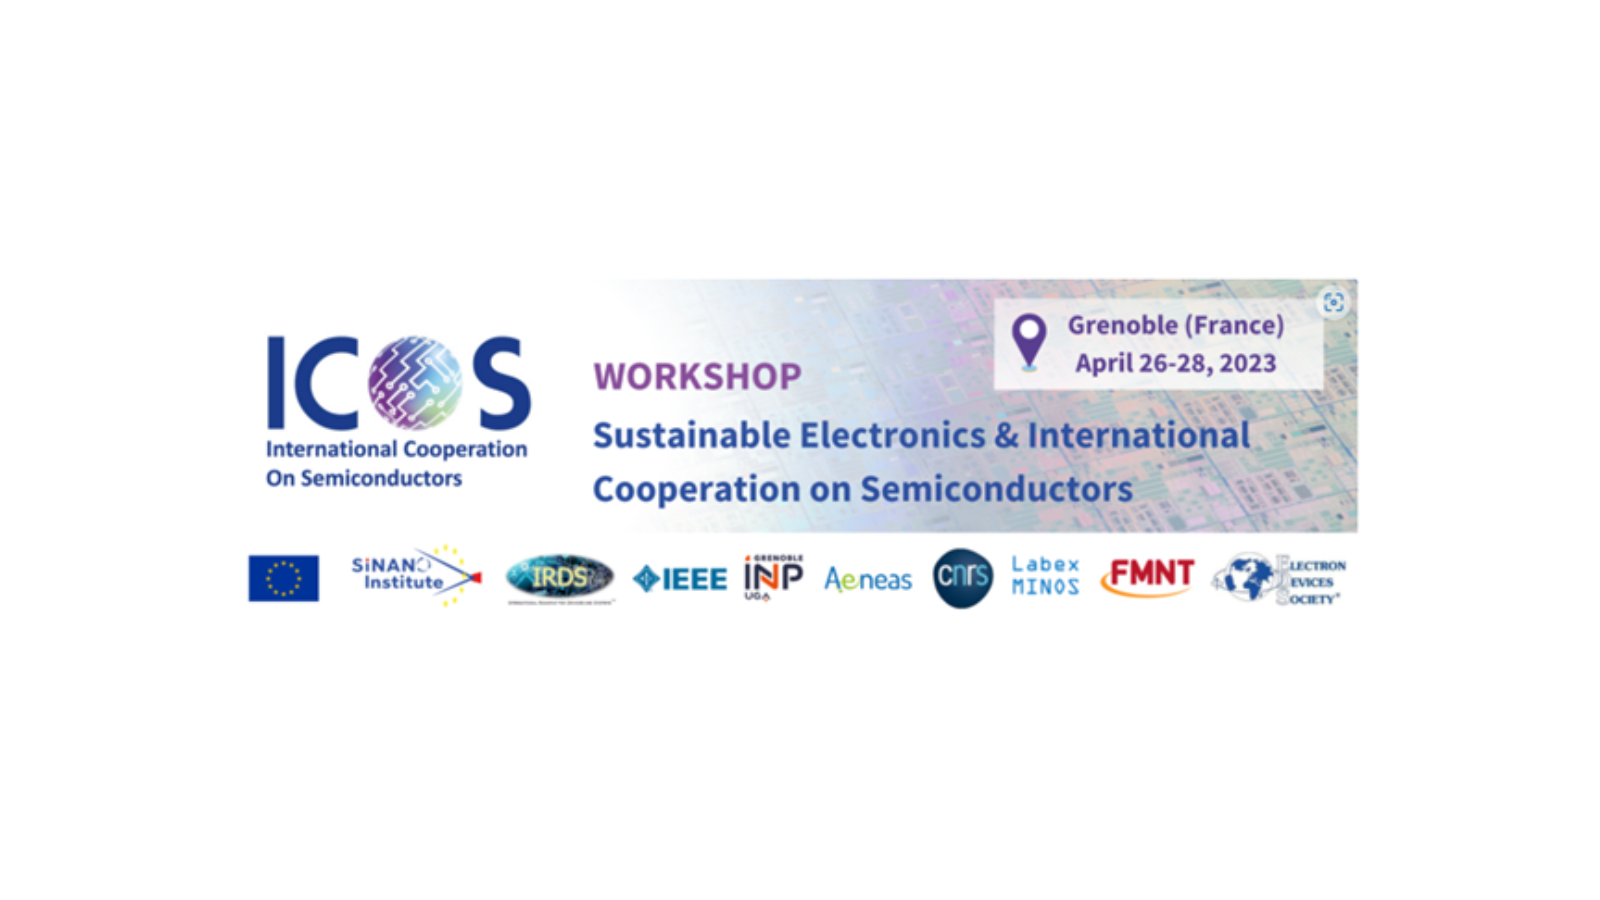 Sustainable Electronics & International Cooperation on Semiconductors – April 26-28th in Grenoble, France